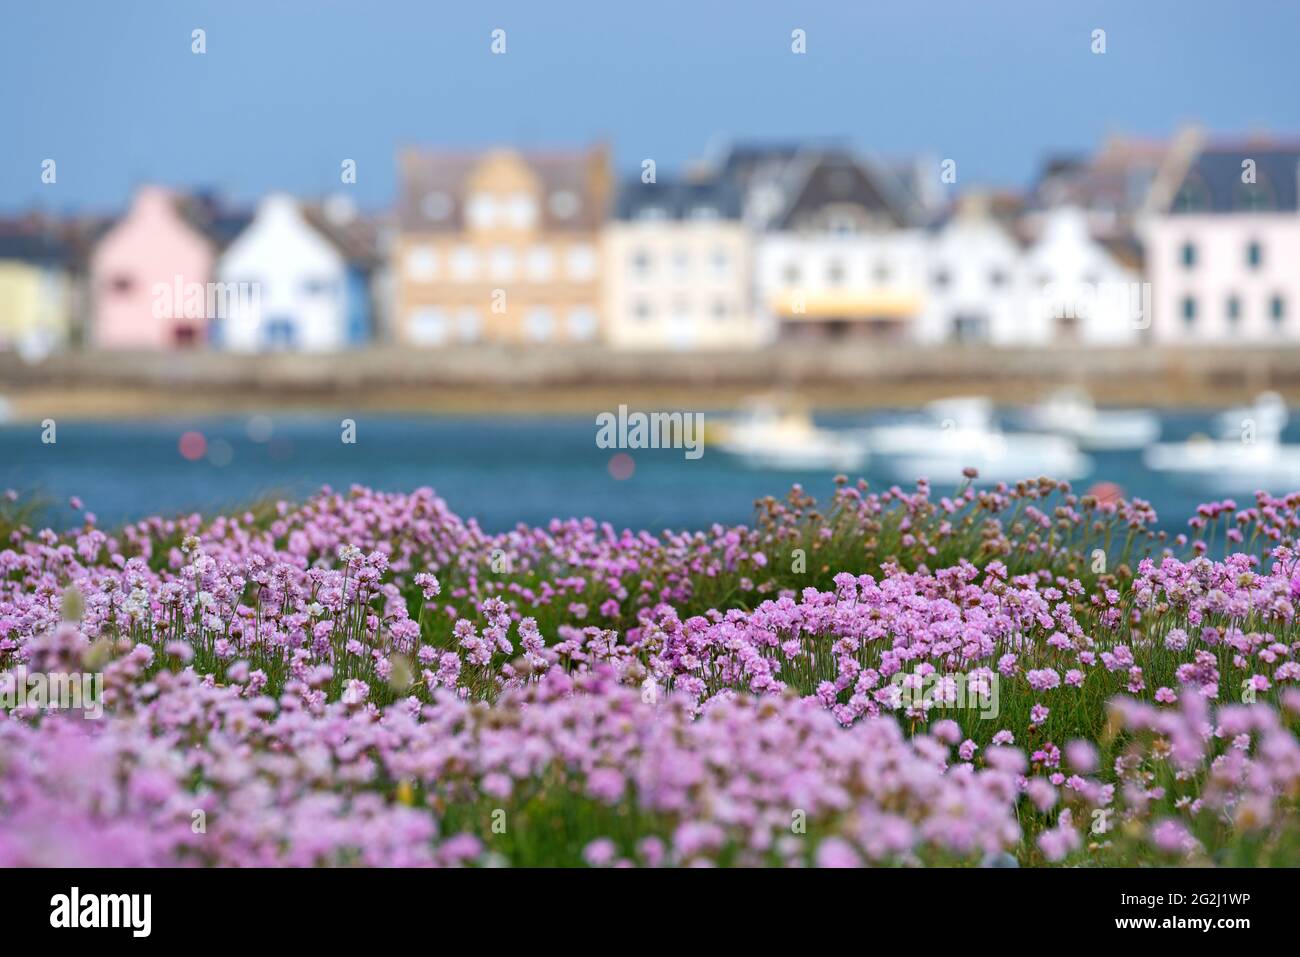 Île de Sein, carnations, in the background the colorful houses of the island, France, Brittany, Finistère department Stock Photo